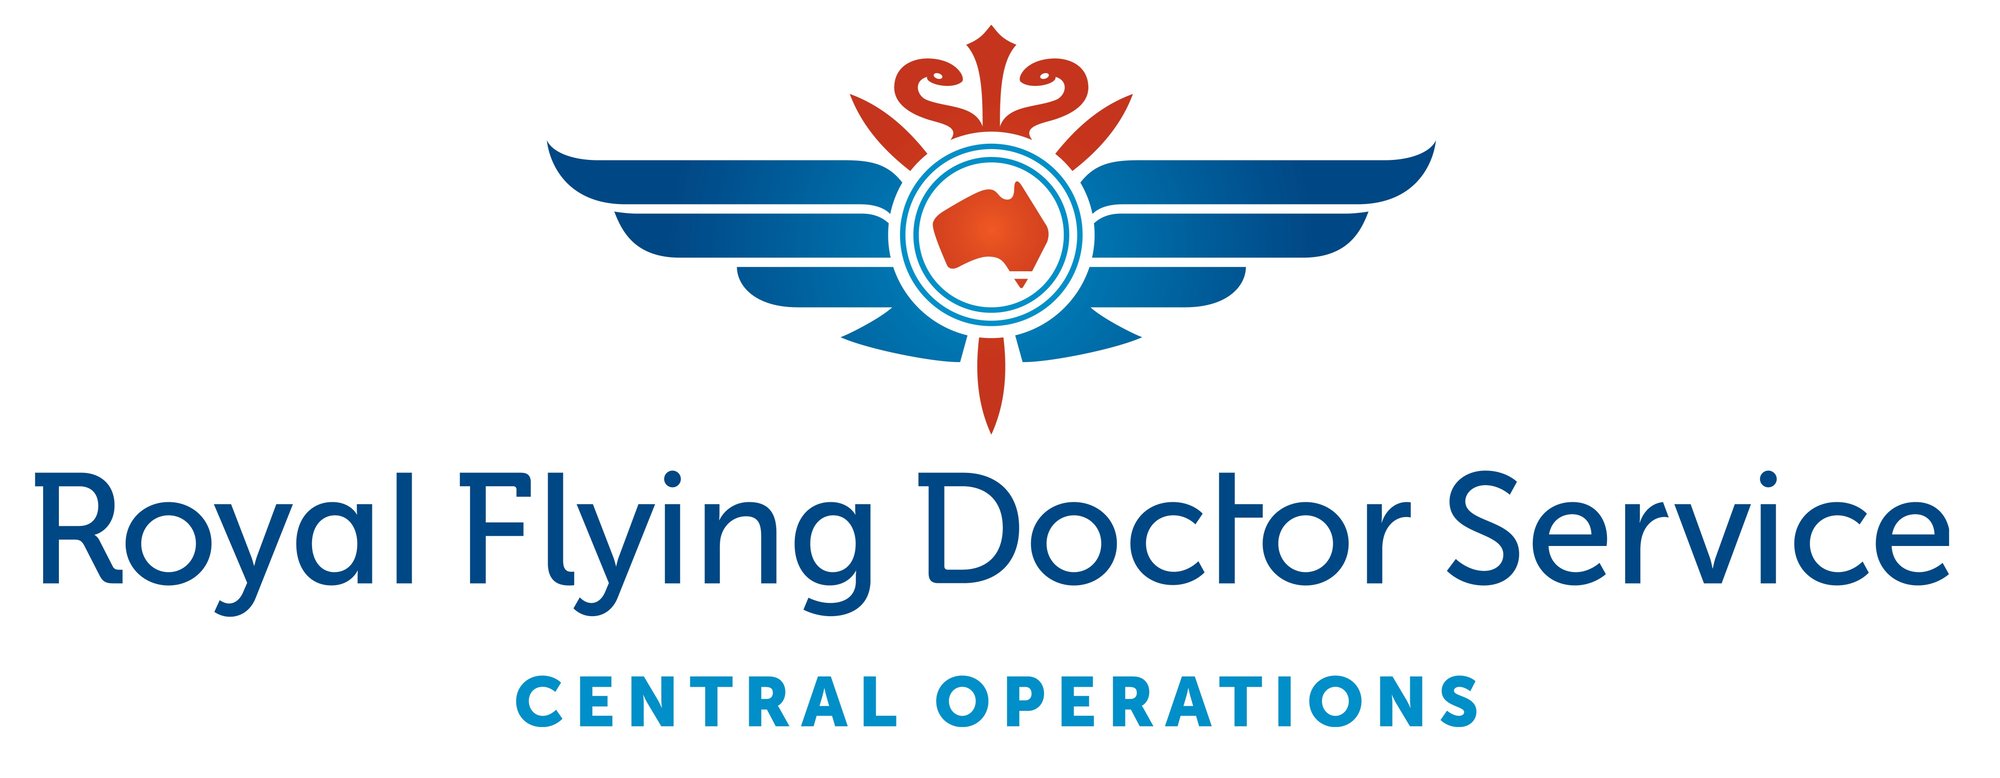 Royal Flying Doctor Service Central Operations